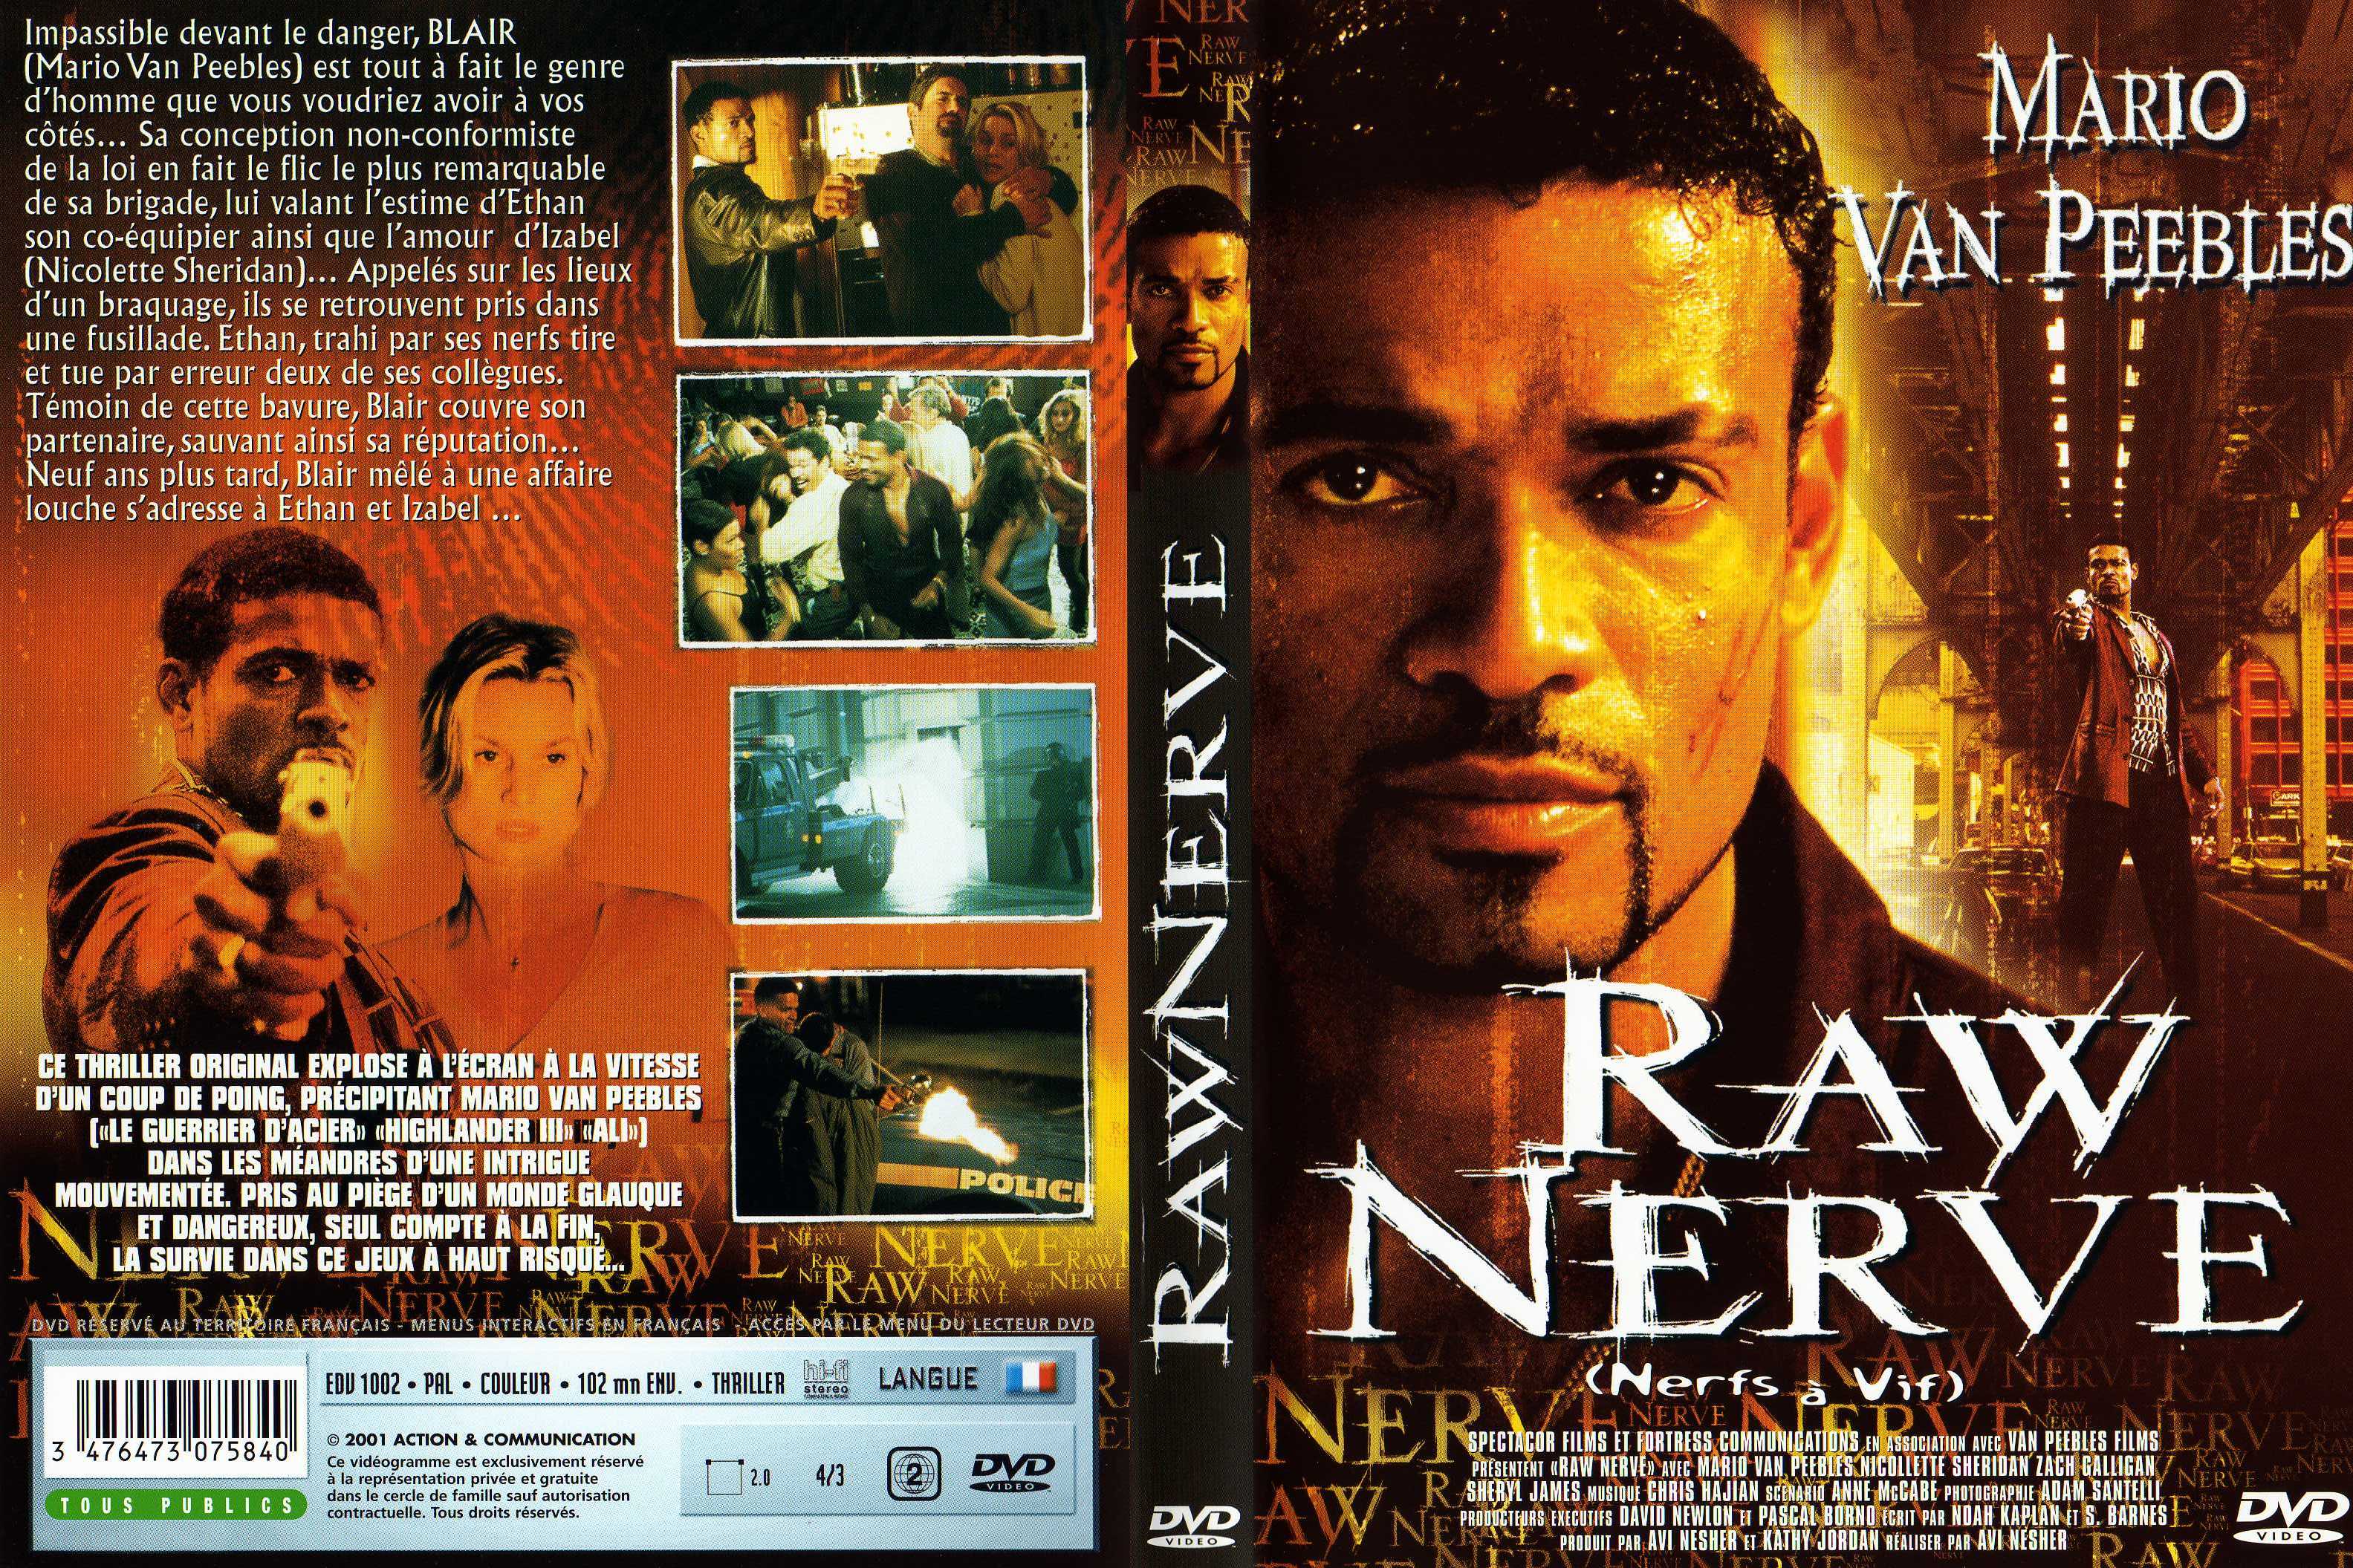 Jaquette DVD Raw Nerve